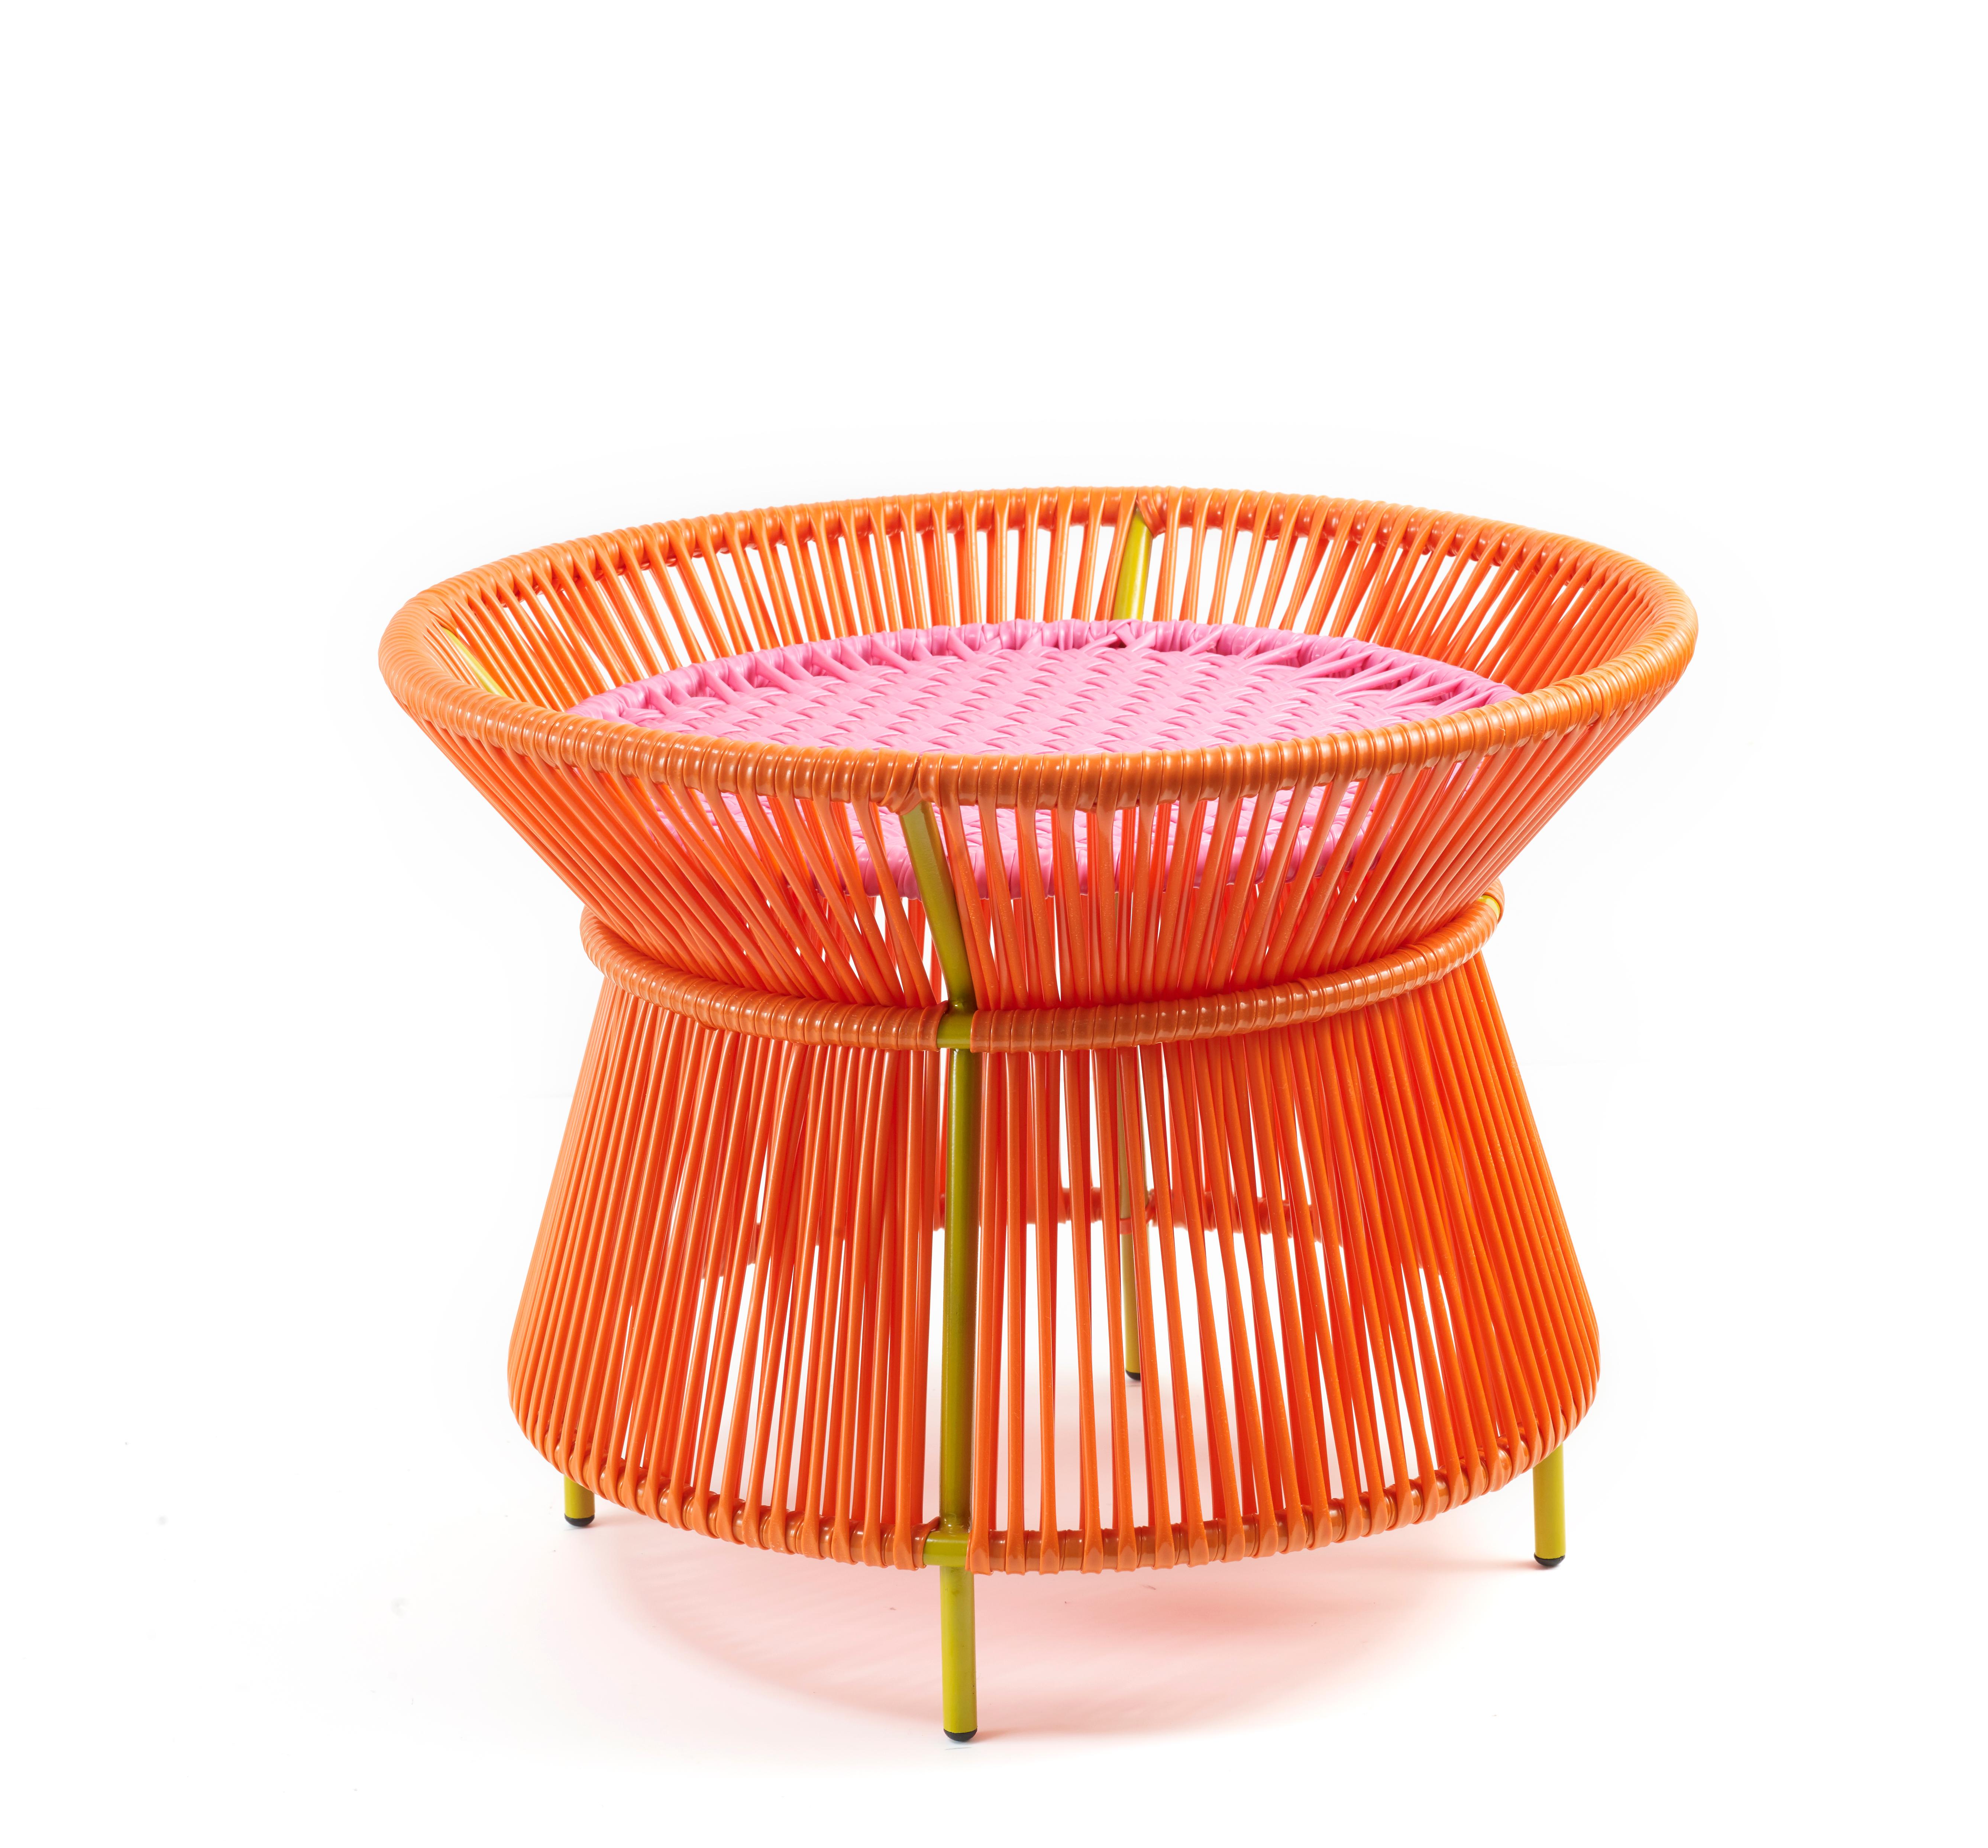 Orange Rose Caribe basket table by Sebastian Herkner
Materials: Galvanized and powder-coated tubular steel. PVC strings are made from recycled plastic.
Technique: Made from recycled plastic and weaved by local craftspeople in Colombia.